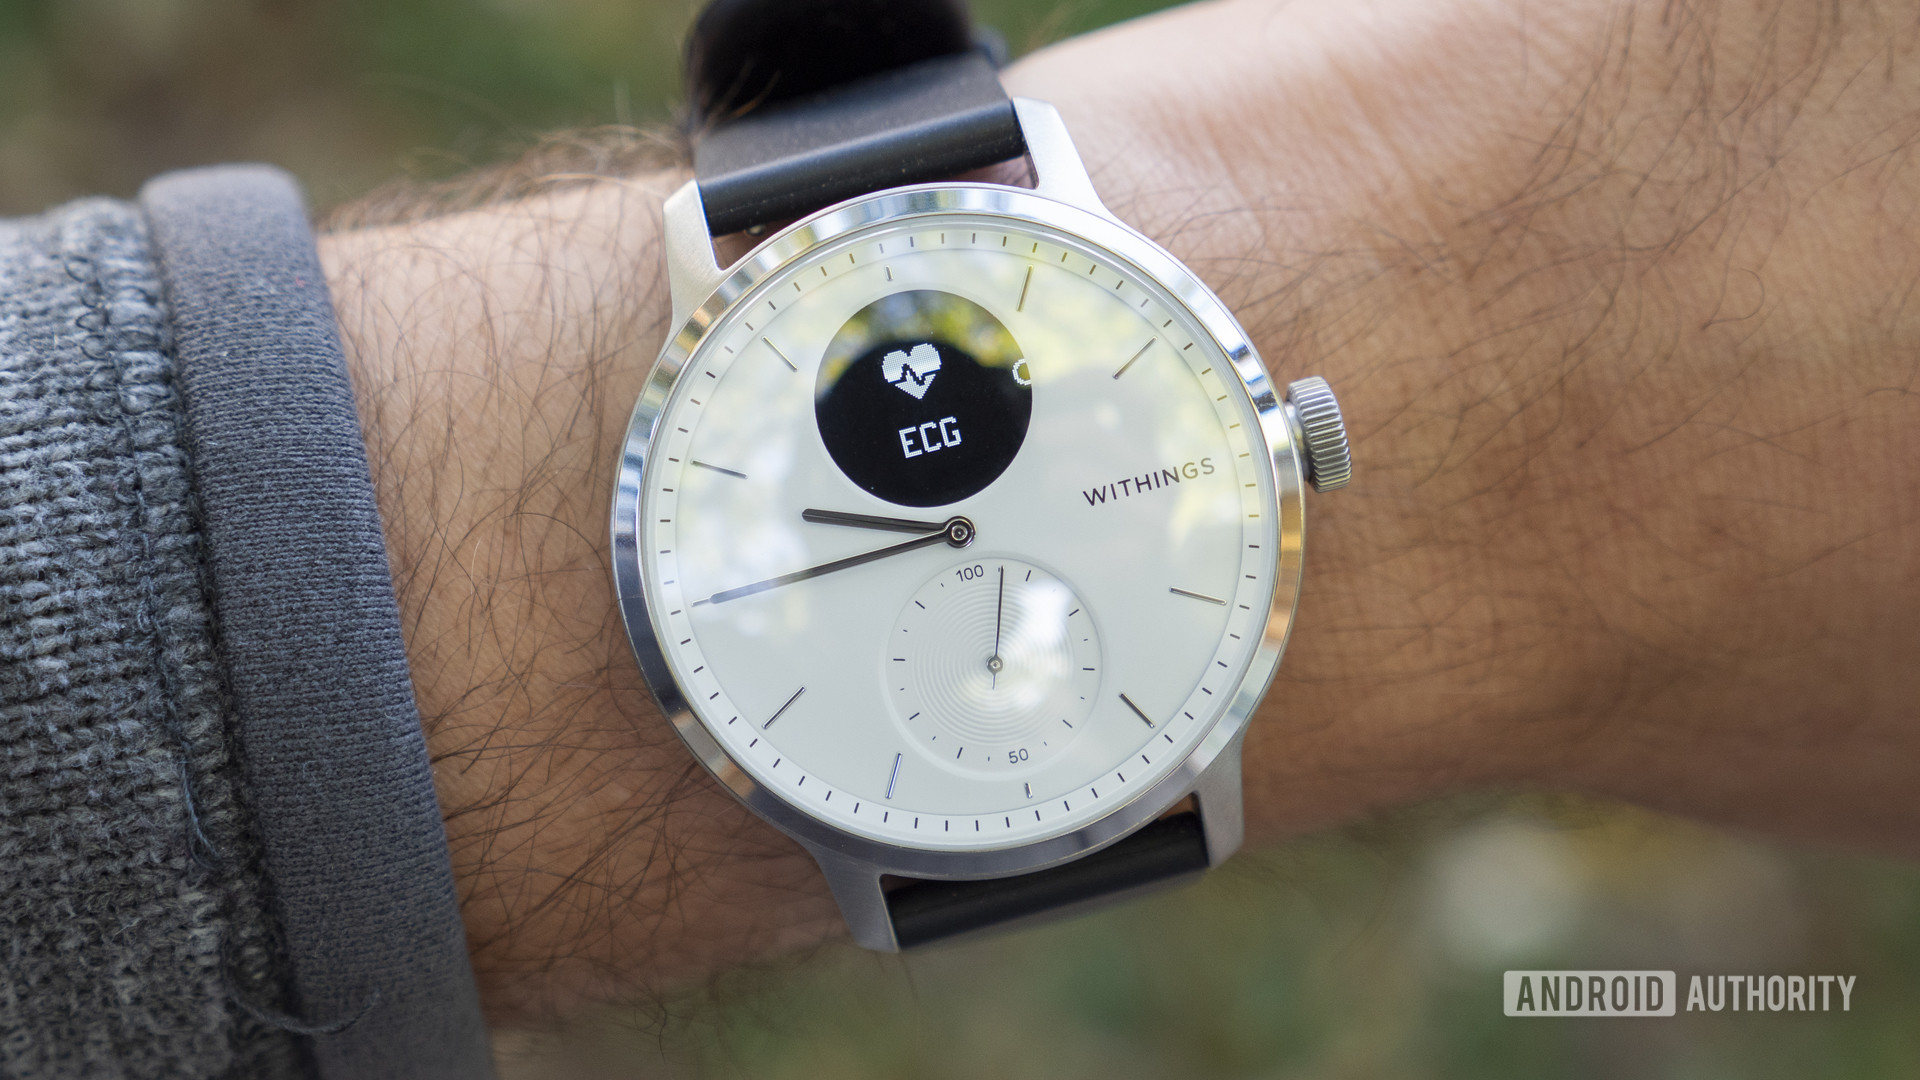 A Withings Scanwatch on a user's wrist displays the ECG app icon.